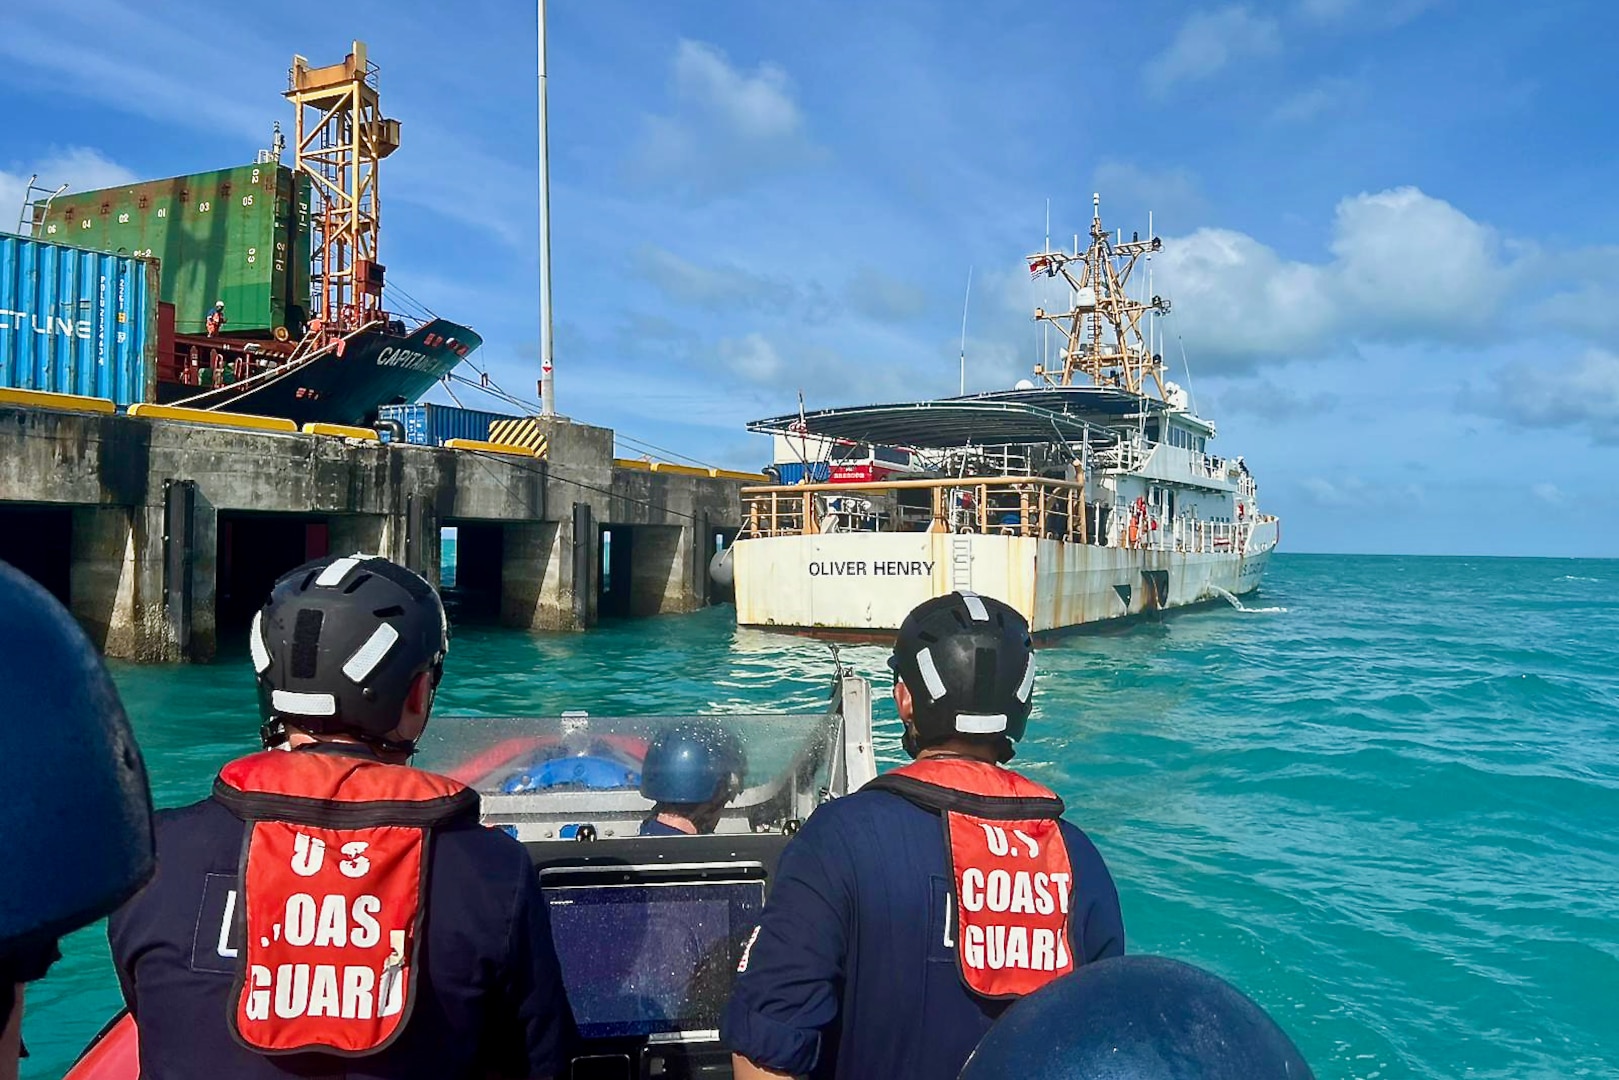 The USCGC Oliver Henry (WPC 1140) crew approach Betio Wharf in Tarawa, Kiribati, on Feb. 16, 2024, during an exchange with the Kiribati Police Maritime Unit officers and recruits. For the first time since 2015, the patrol incorporated shipriders from the PMU, executing the maritime bilateral agreement signed with Kiribati in 2008. These engagements under Operation Blue Pacific emphasize the United States' commitment to strengthening ties and ensuring maritime security within the Pacific community. (U.S Coast Guard photo by Lt. j.g. Nicholas Haas)